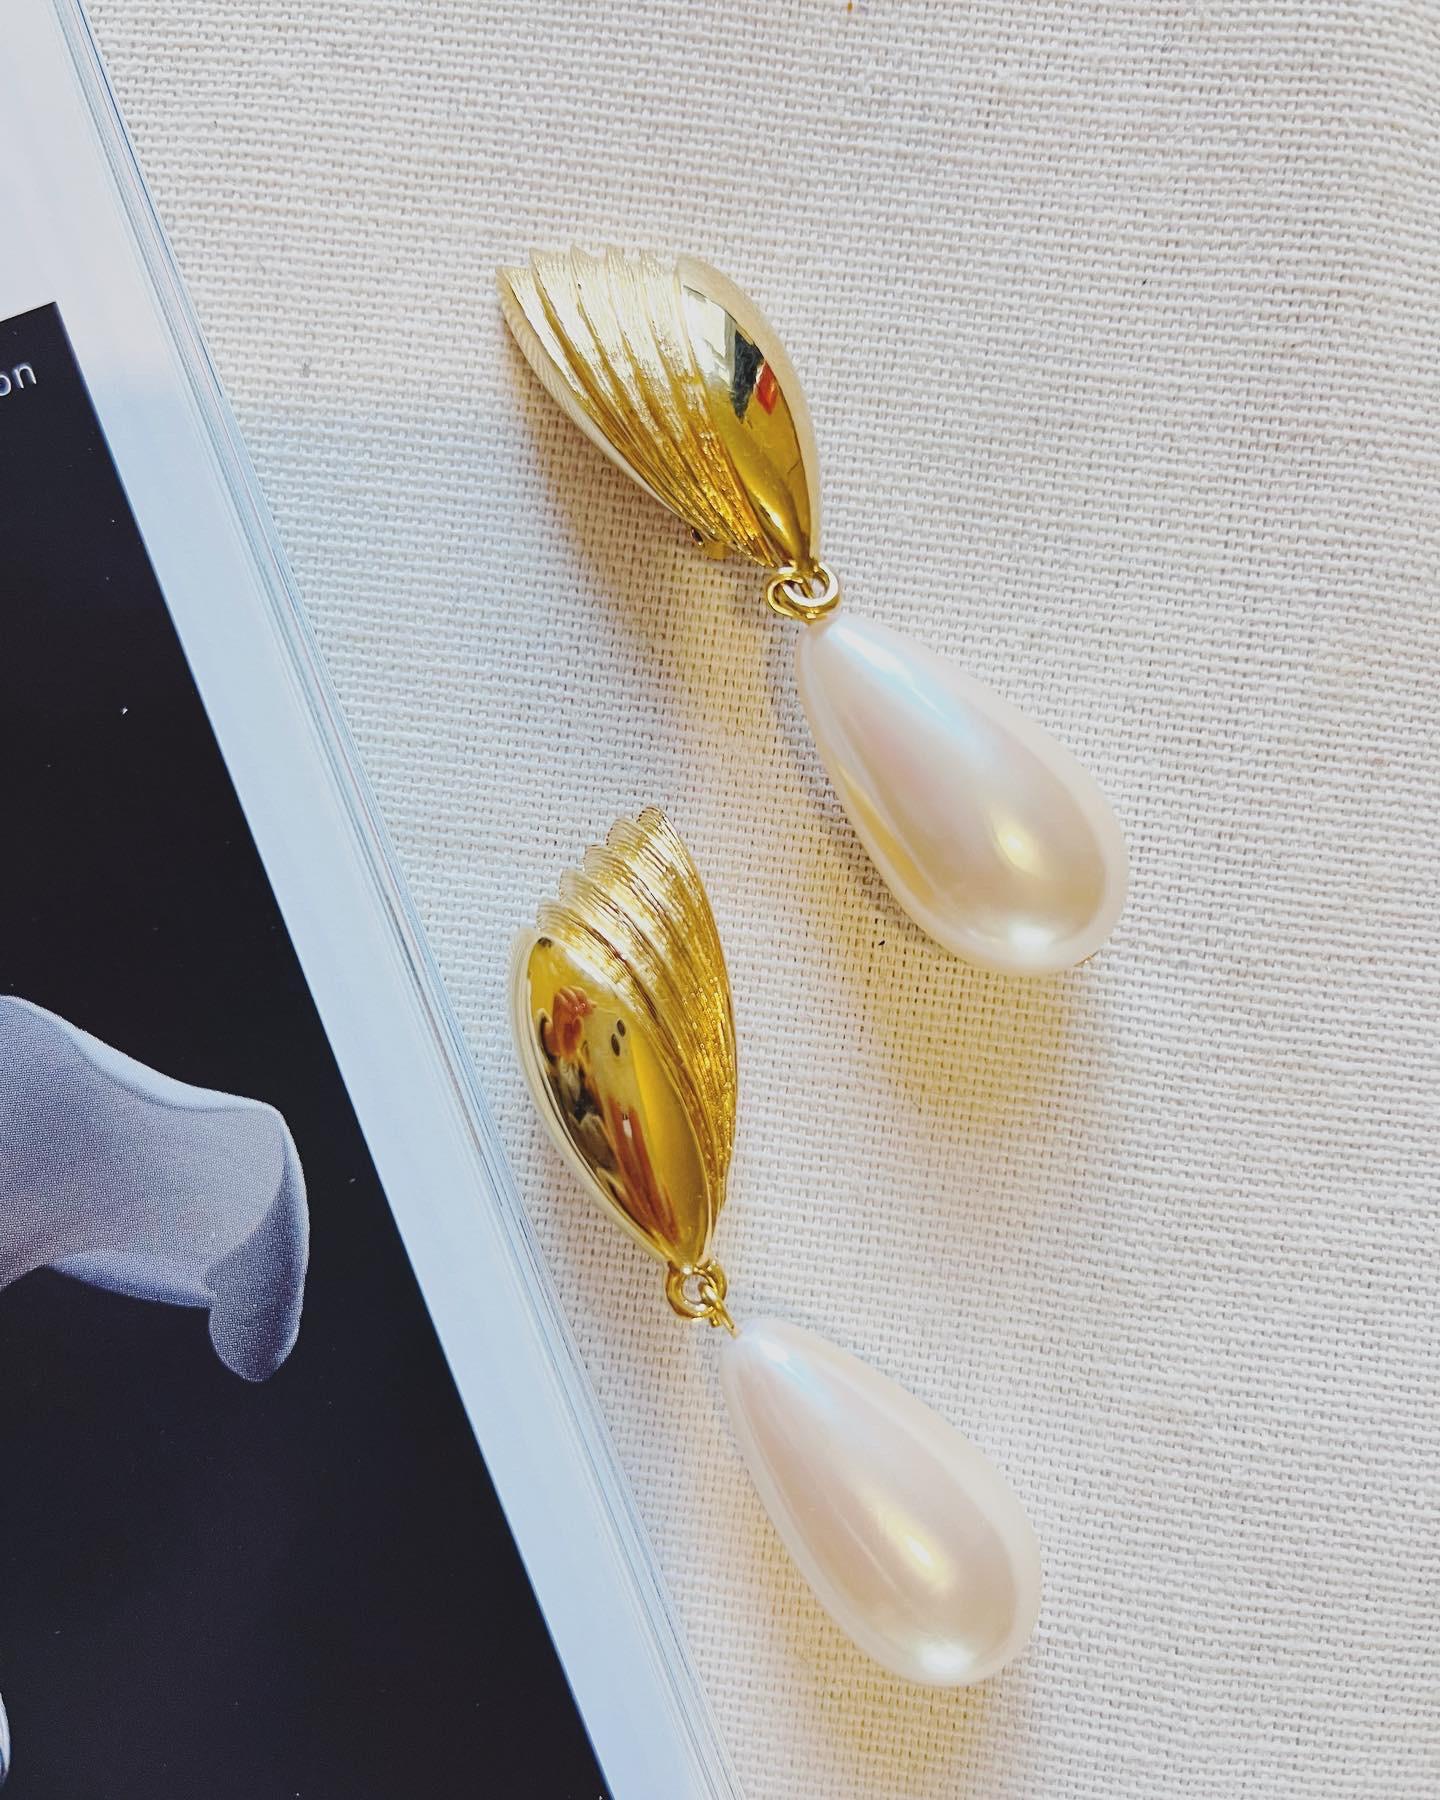 givenchy pearl earrings